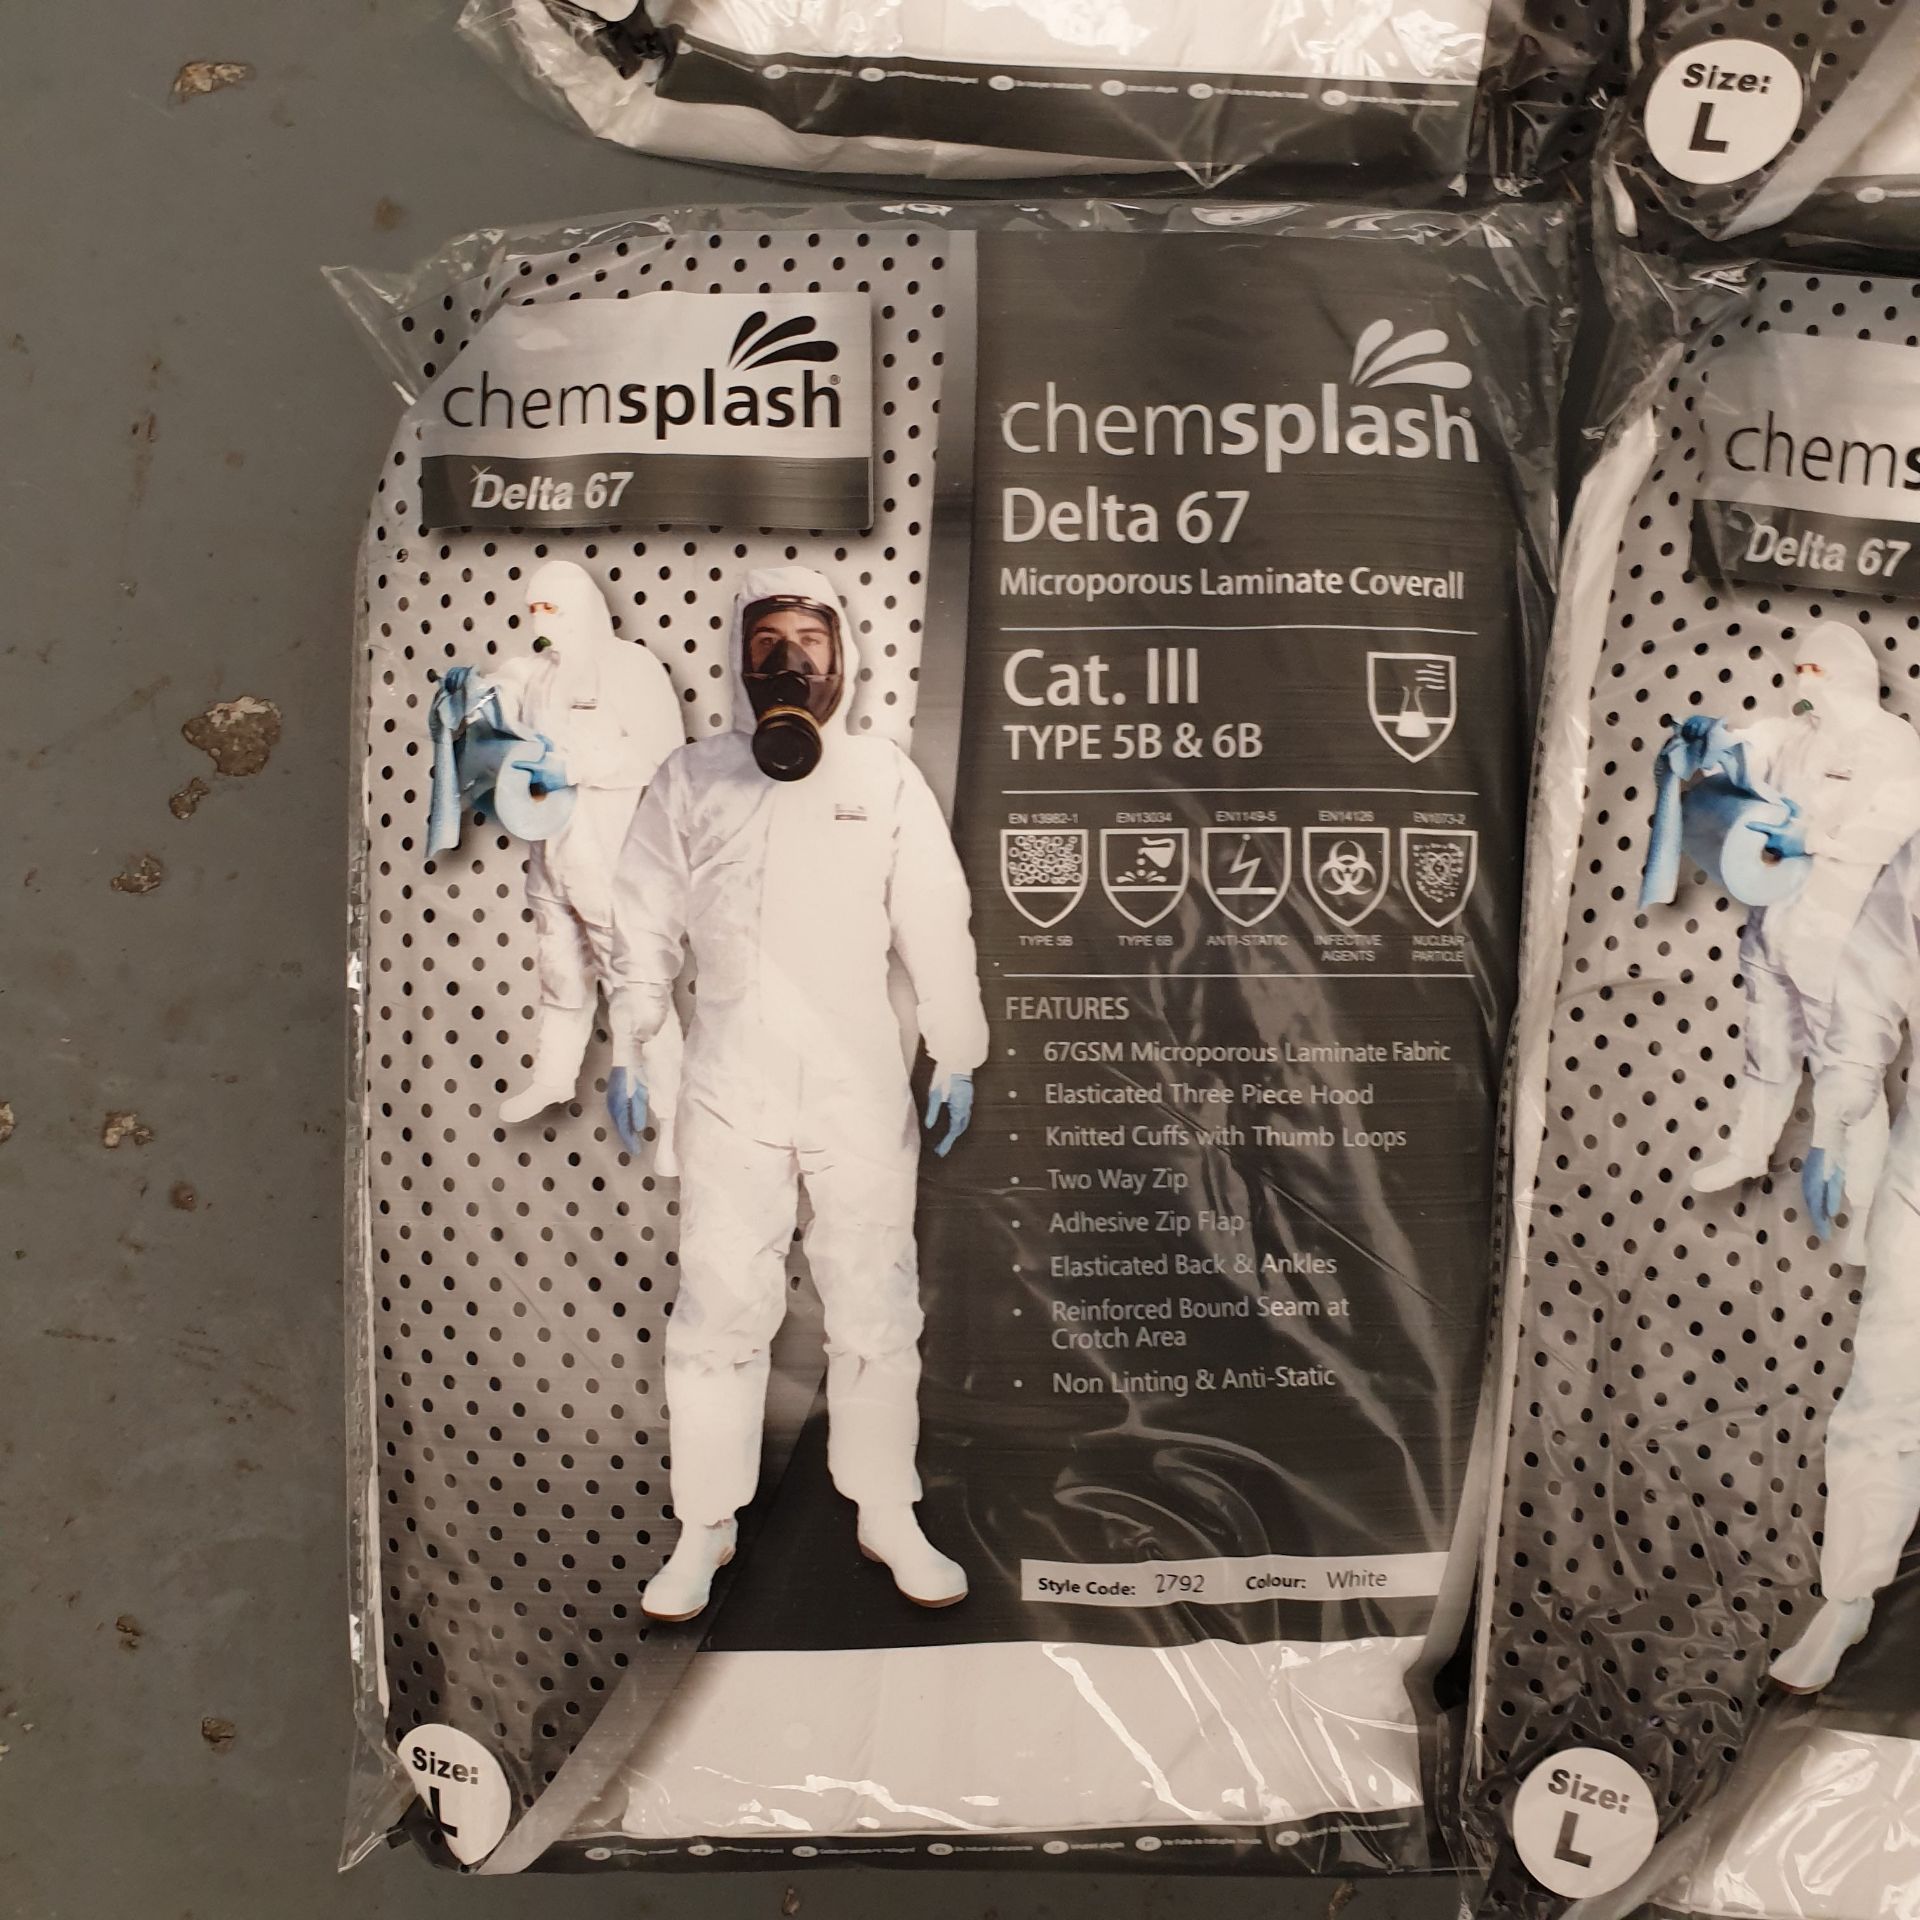 21 x Chemsplash Delta 67 Microporous Laminate Coverall Safety Suits With Hood. - Bild 2 aus 2